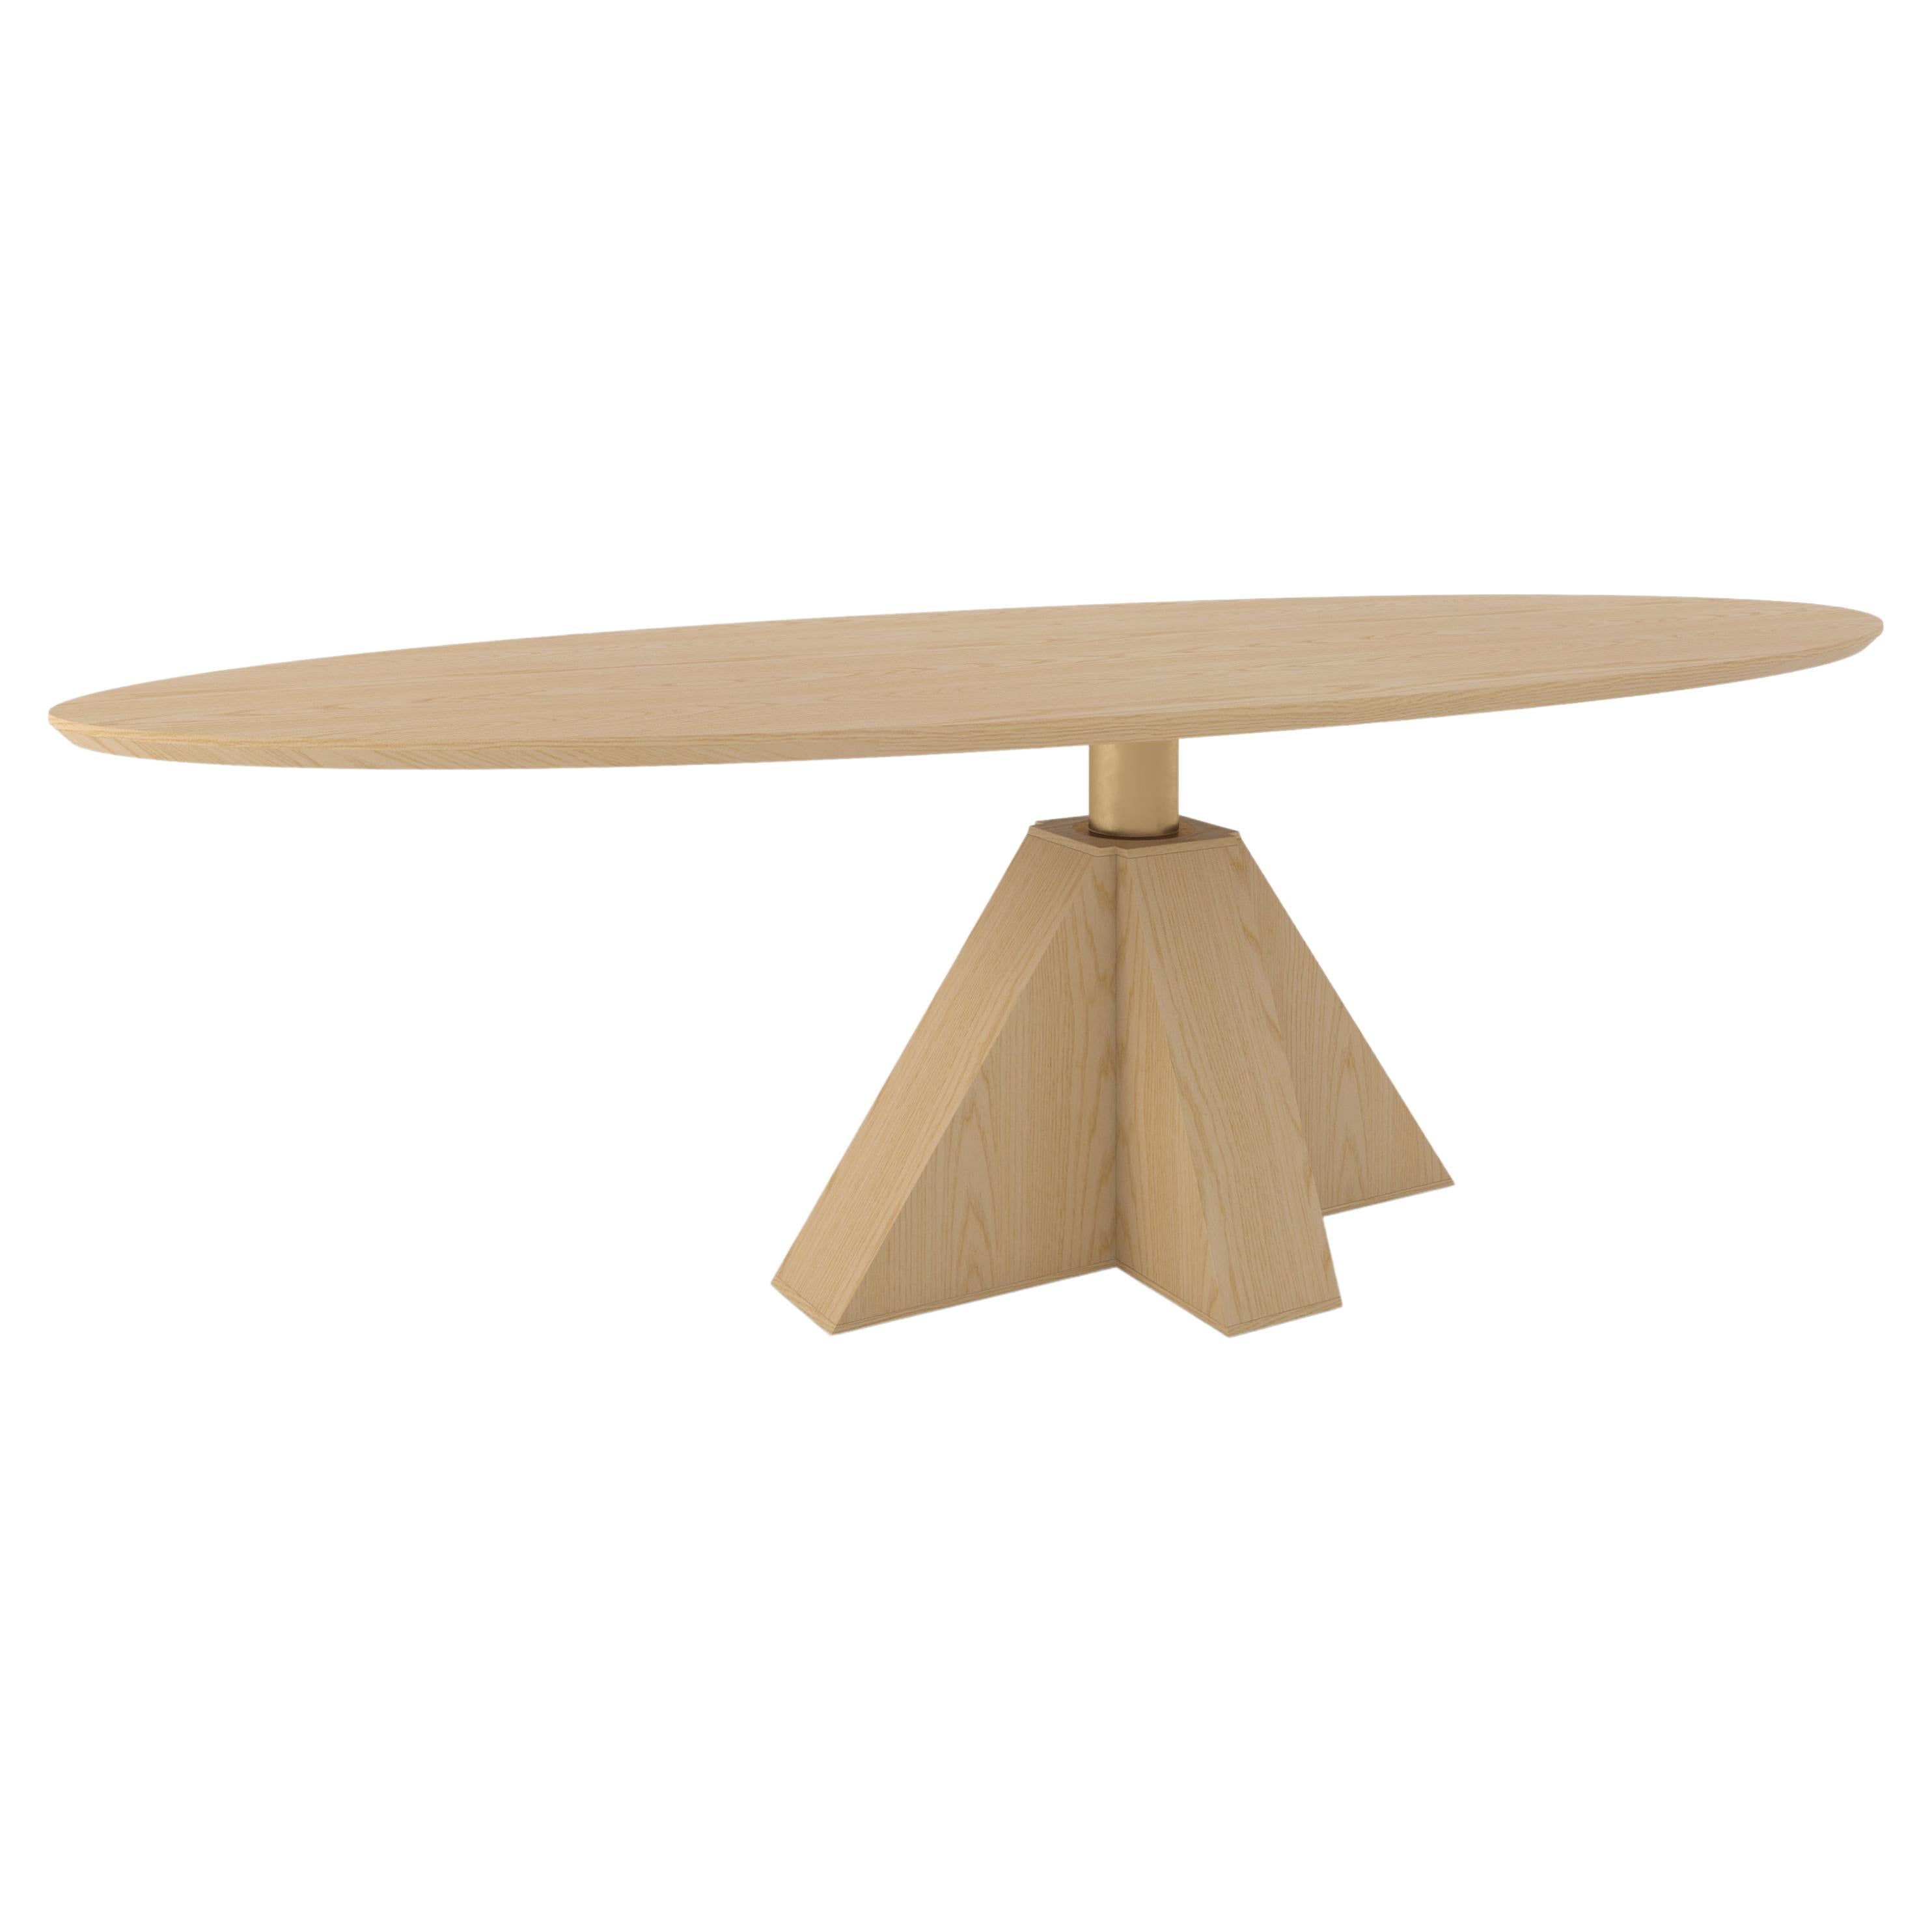 M-Oval Table by Daniel Boddam, 70" x 41", Natural Oak For Sale